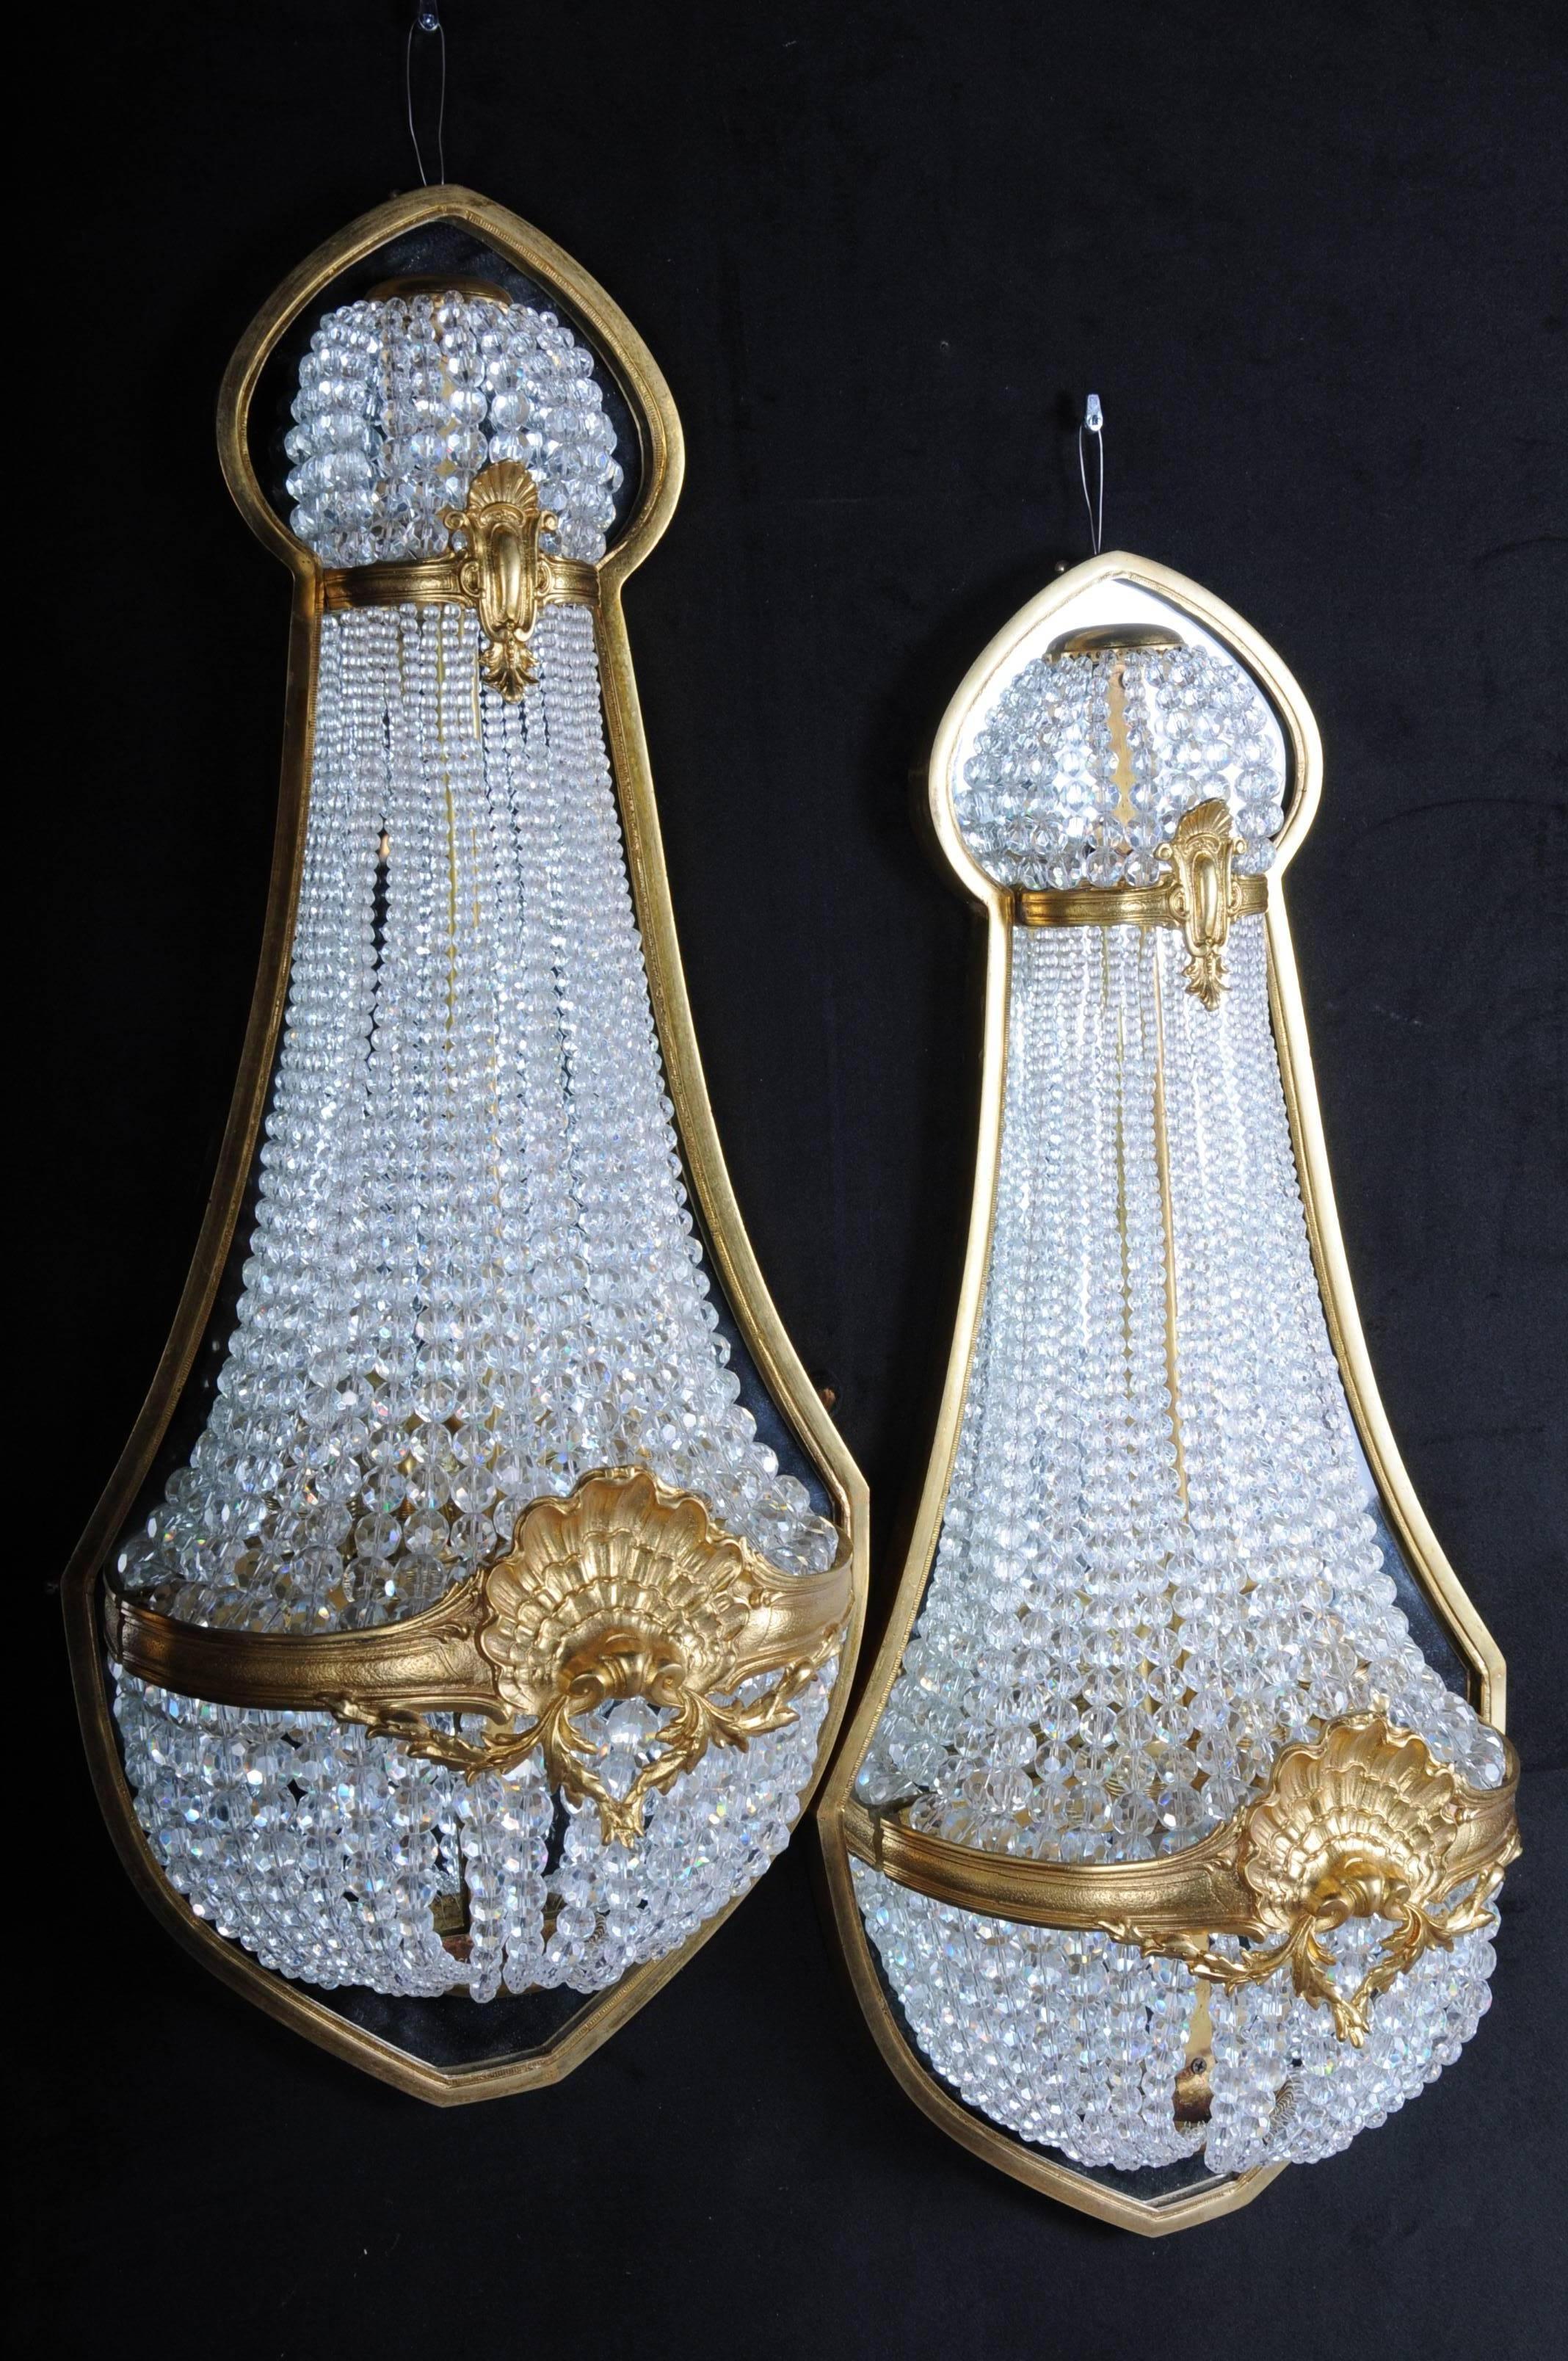 Unique wall lamp in Louis Seize style, 1790

A classicist sconce pair with finely engraved bronze. Basket-shaped body made of hand-cut French ball prisms in the course connected by wide, ornamental ornate hoop. Centrally placed shell. The finely